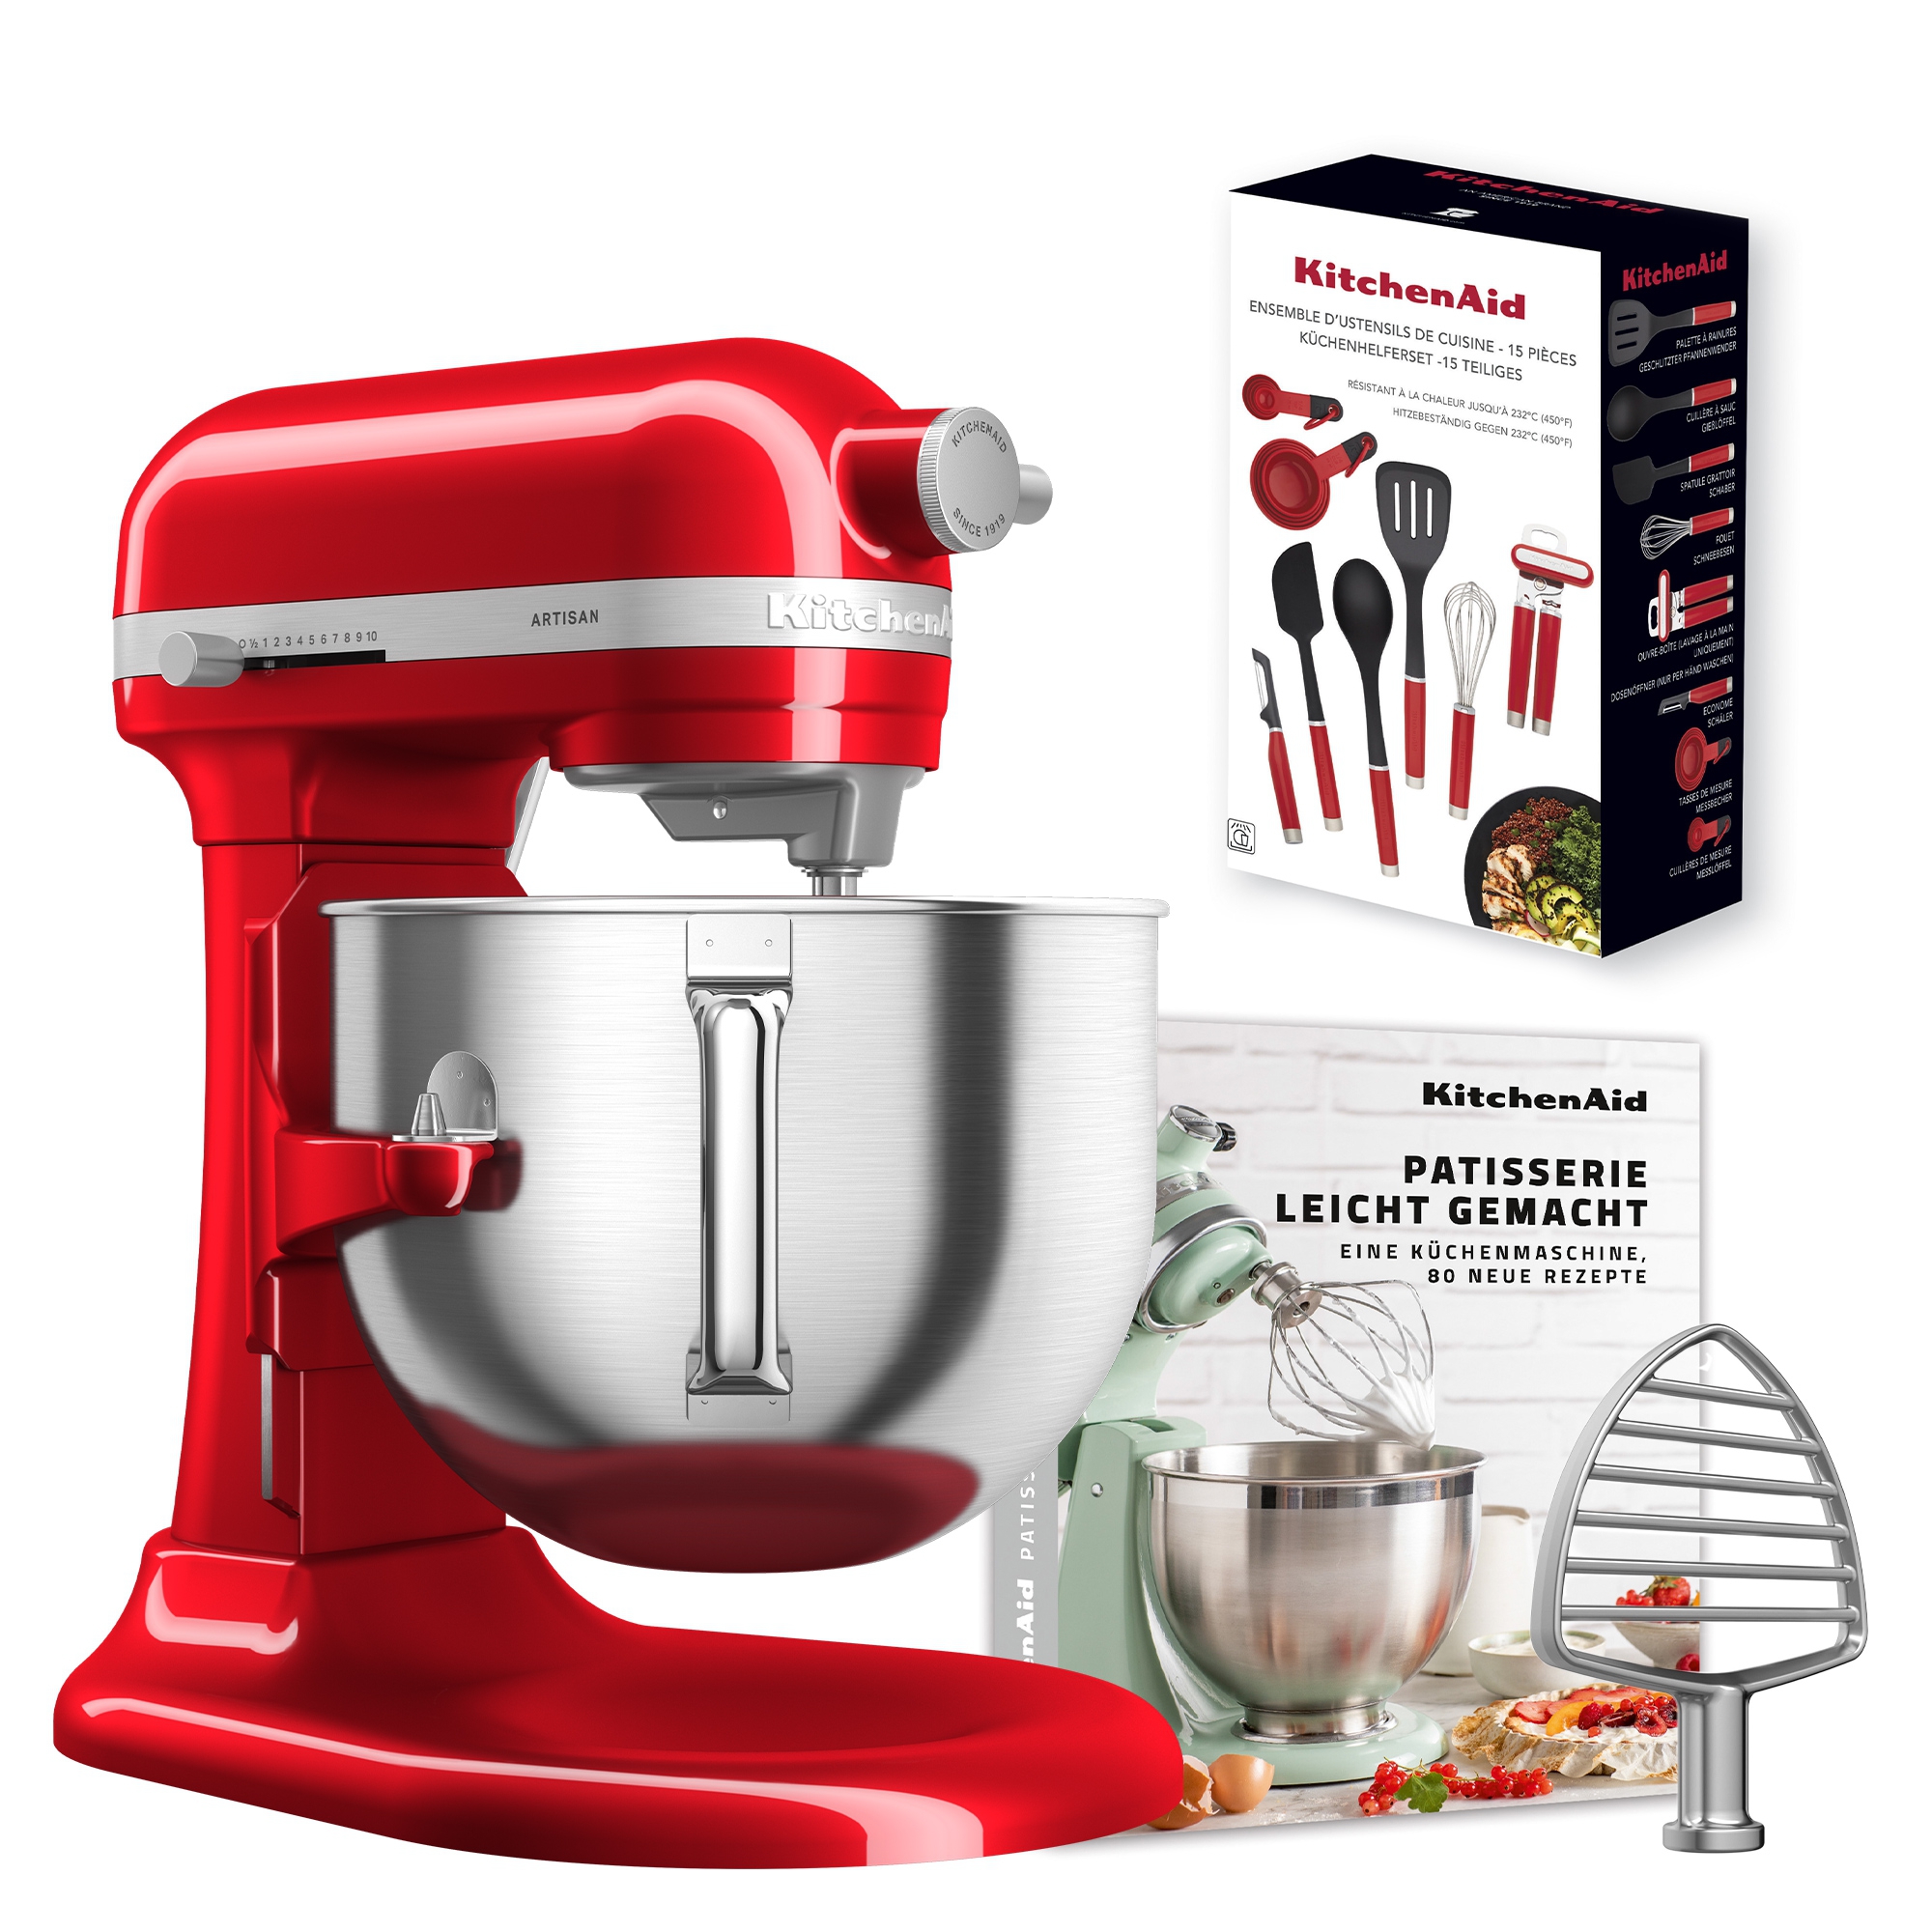 KitchenAid - Set food processor 6,6 L + pastry mixer + 15 pcs kitchen aid set + recipe book "Patisserie made easy" - Candy Apple Red